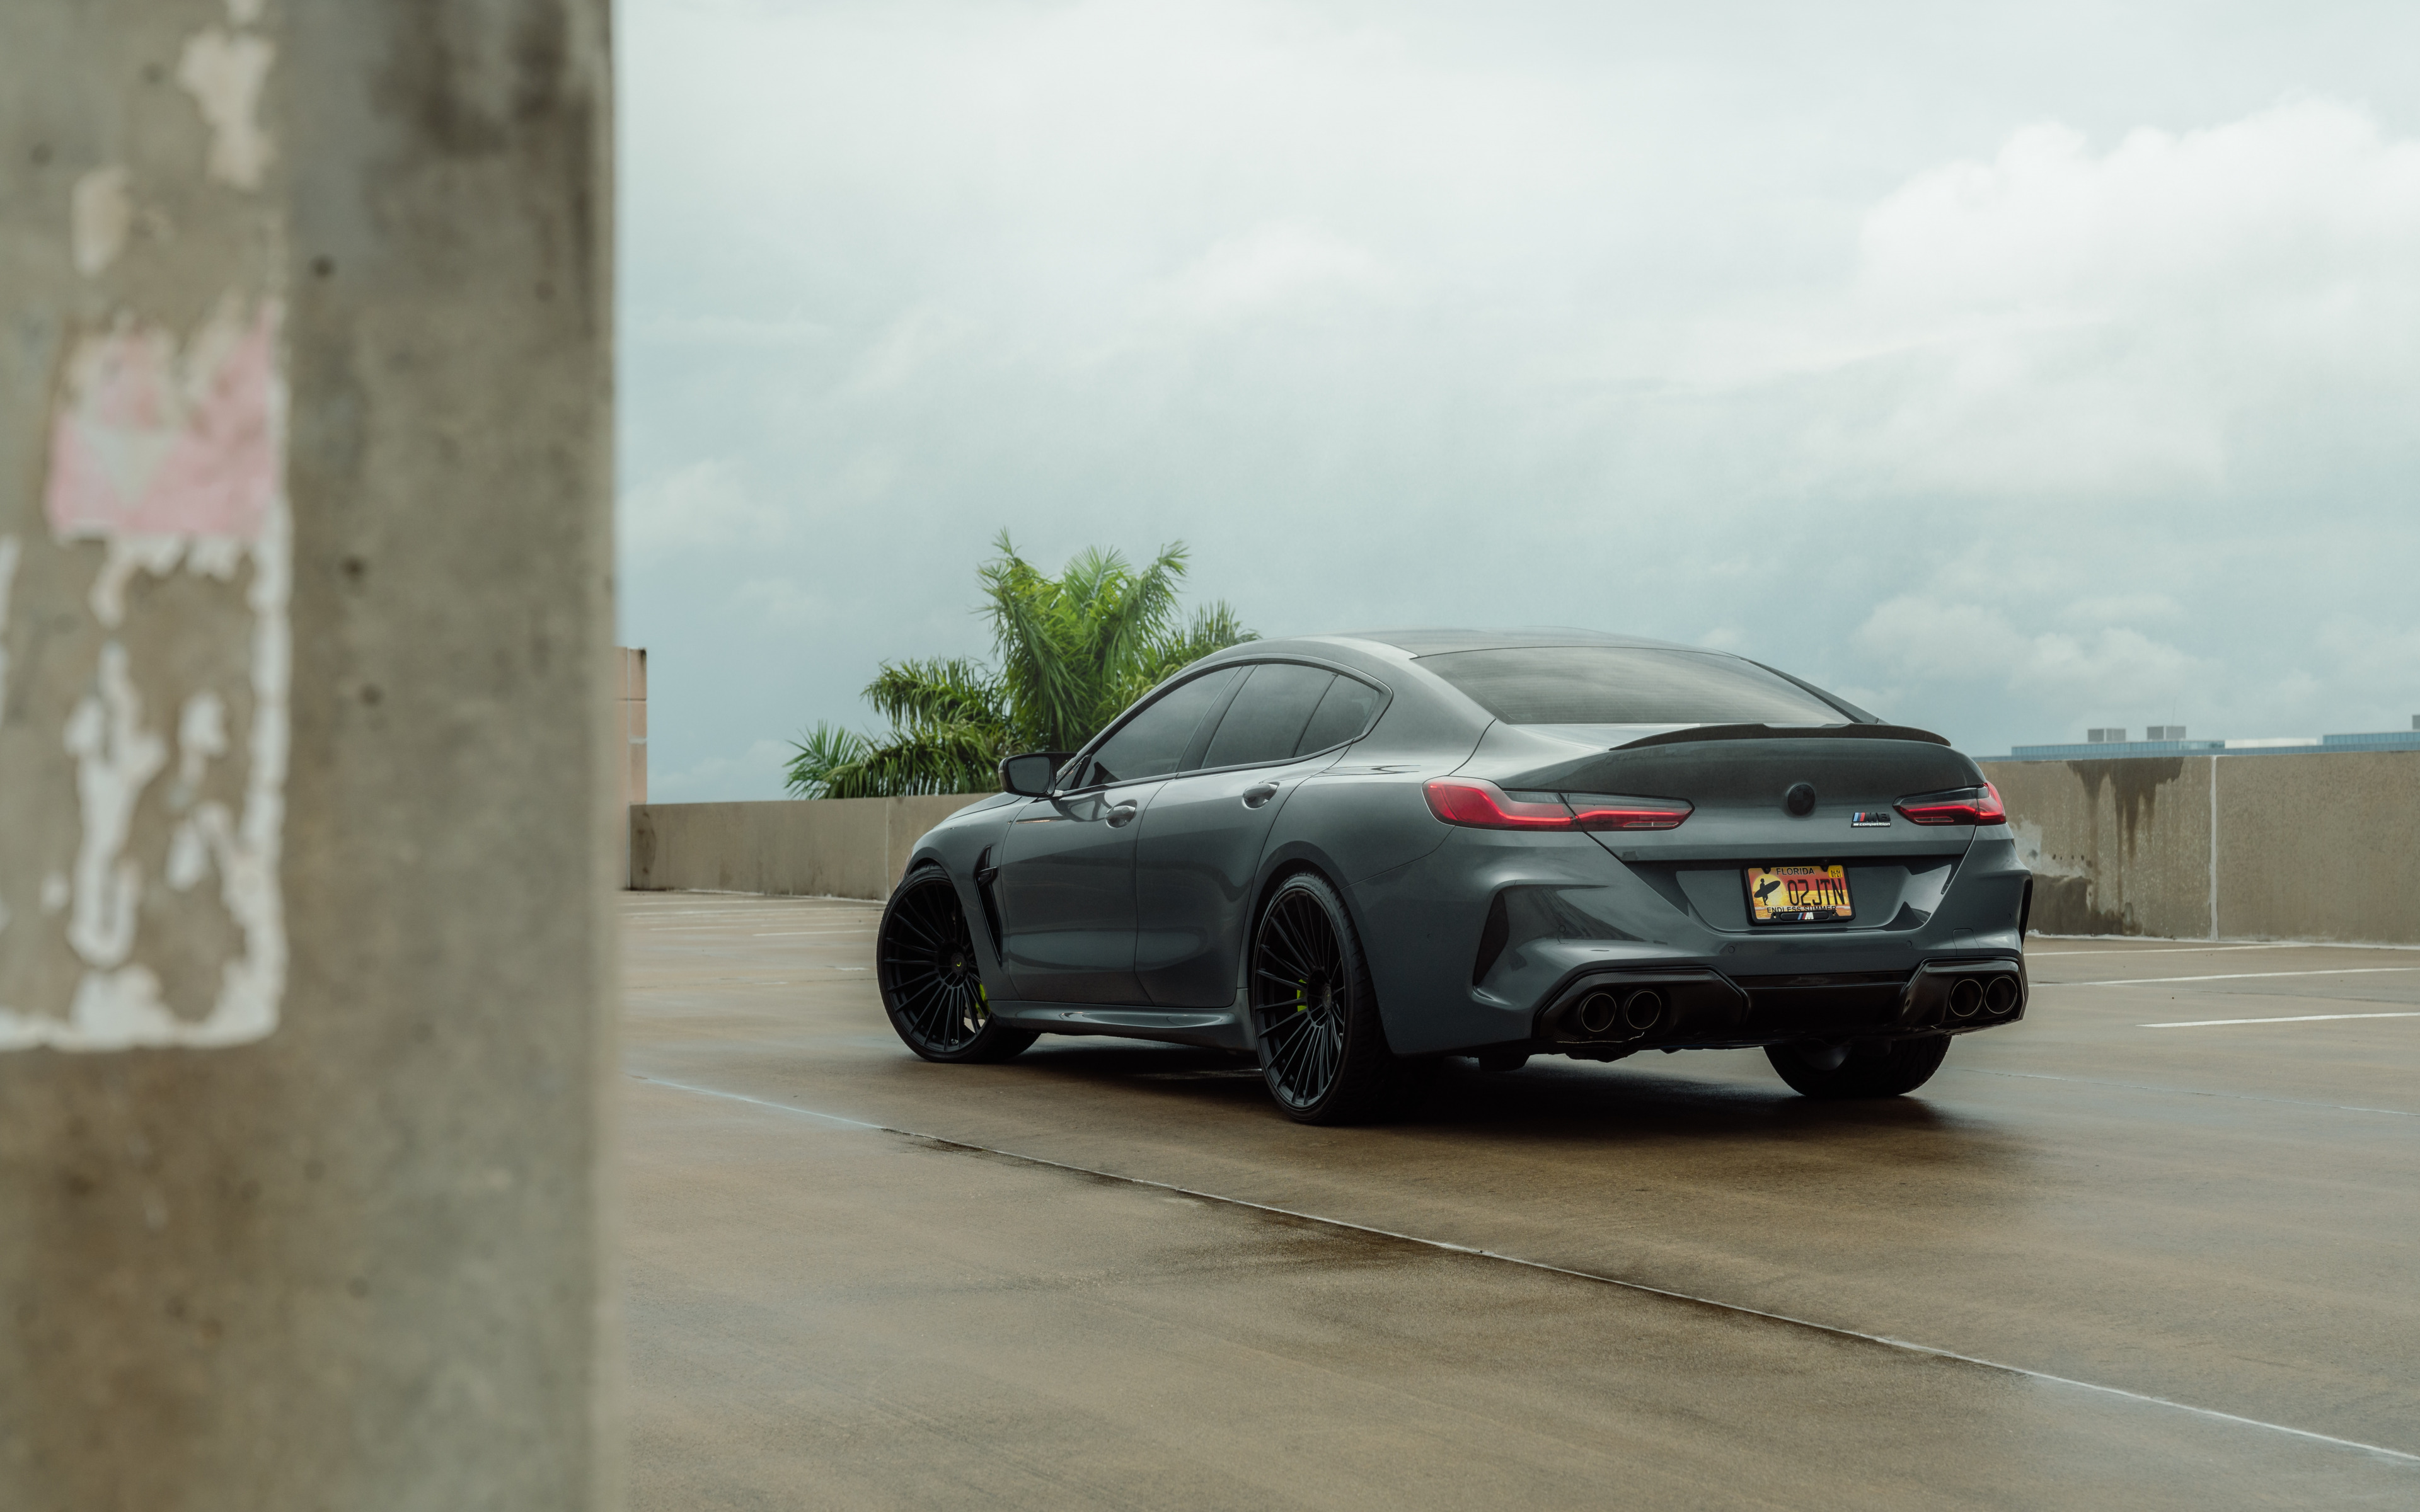 4k, BMW M8 Competition M8 Gran Coupe, F93, rear view, exterior, matte black M8 Gran Coupe, 8 Series, M8 Gran Coupe tuning, F93 tuning, German cars, BMW